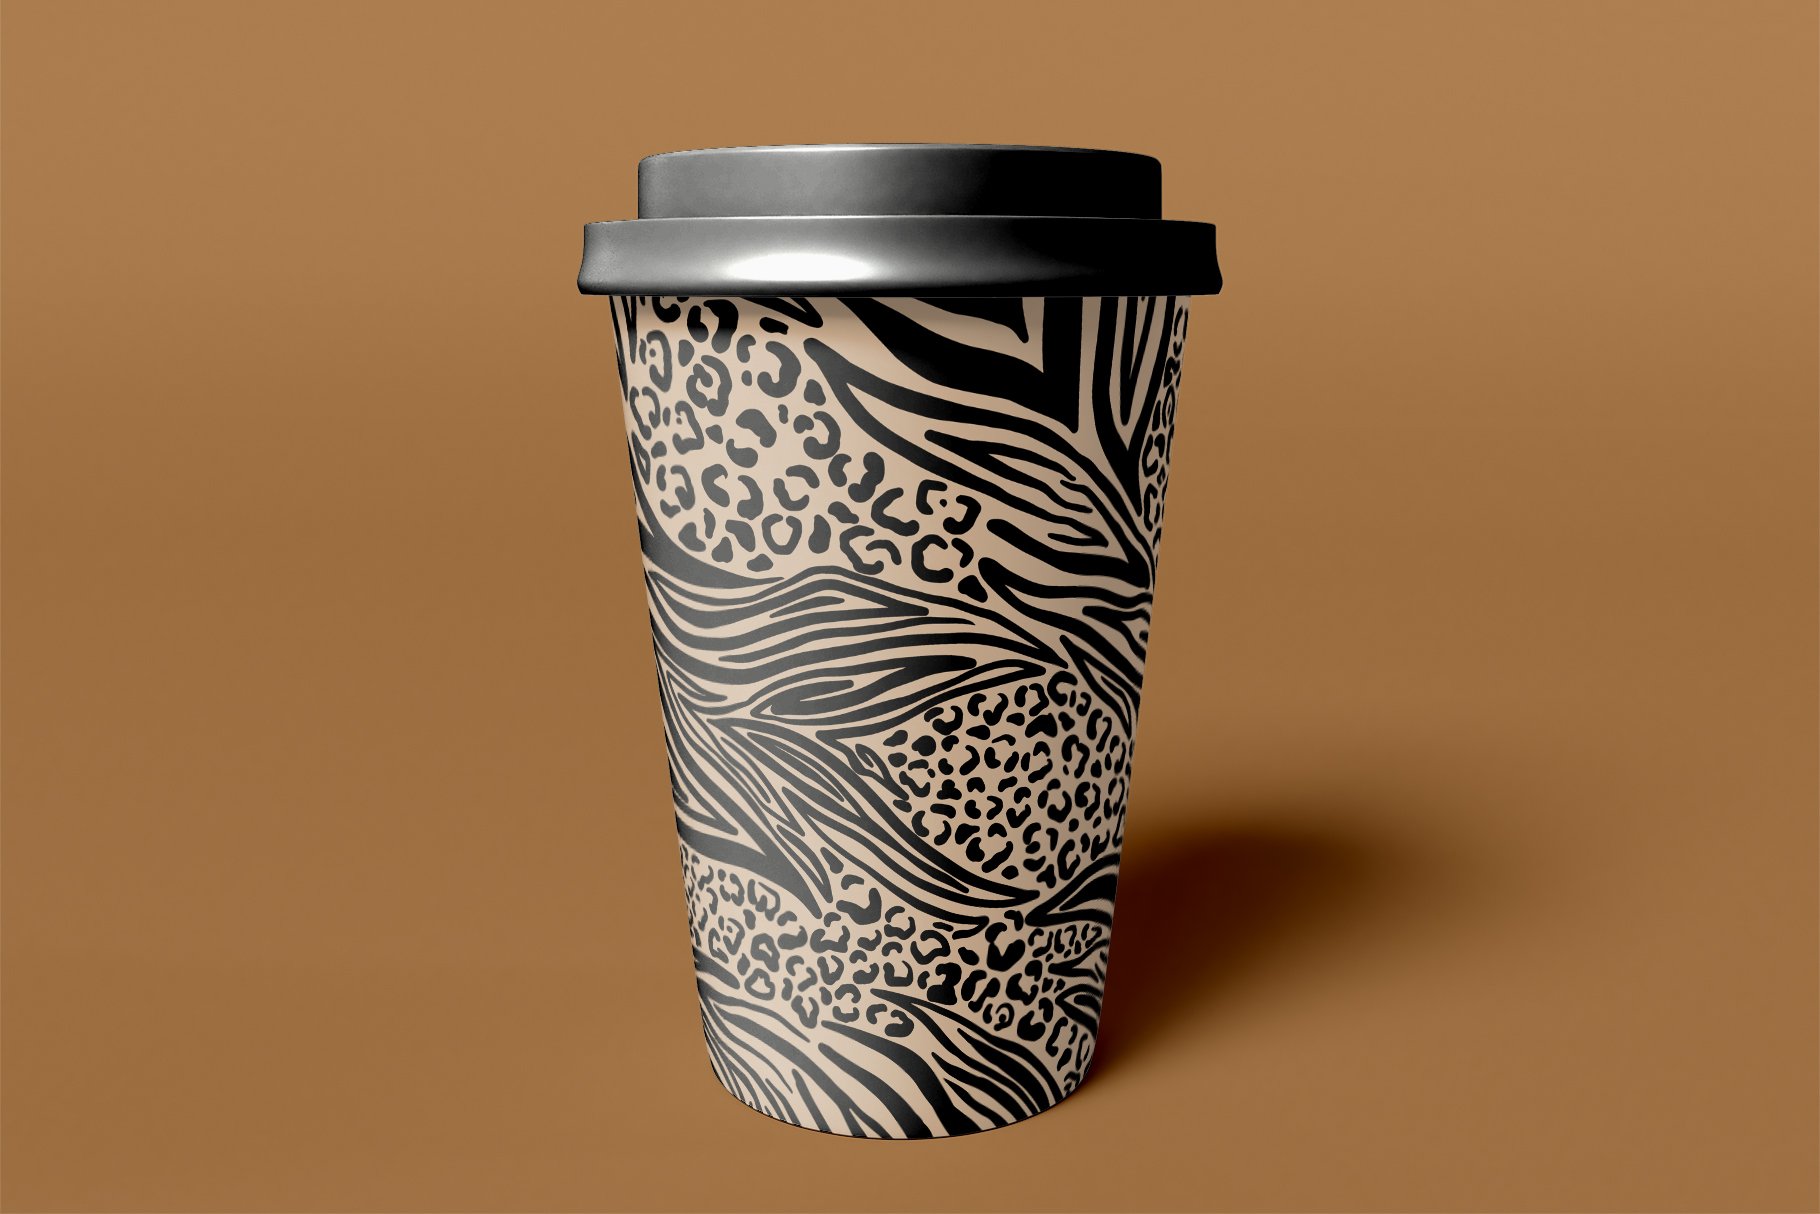 Wild print for a cup.